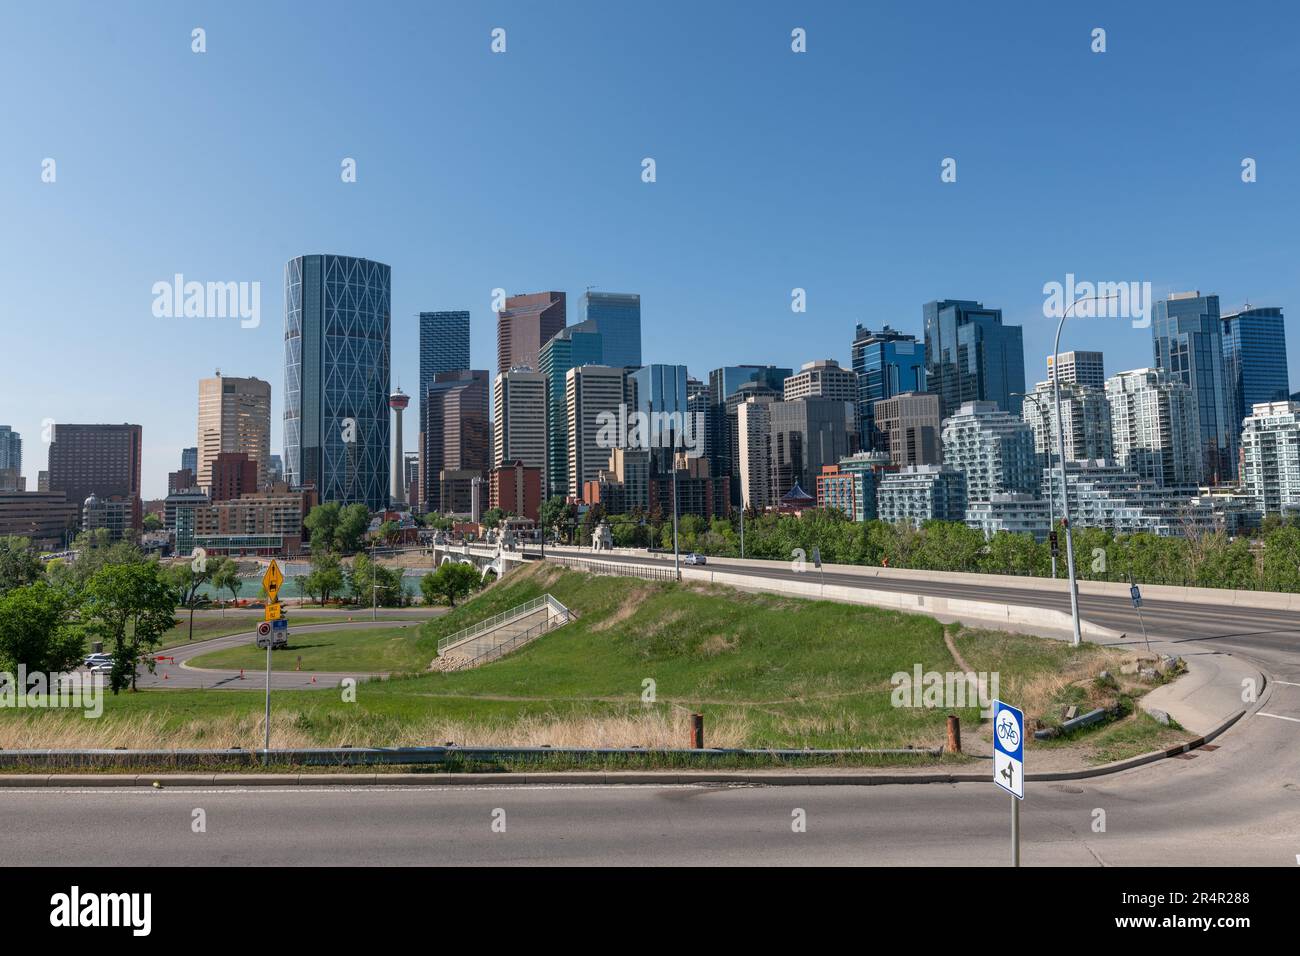 Pano views along Centre St Bridge in Calgary, Alberta on a blue sky day with city skyline in view, tower, sky scrapers in scenic skyscape landscape. Stock Photo